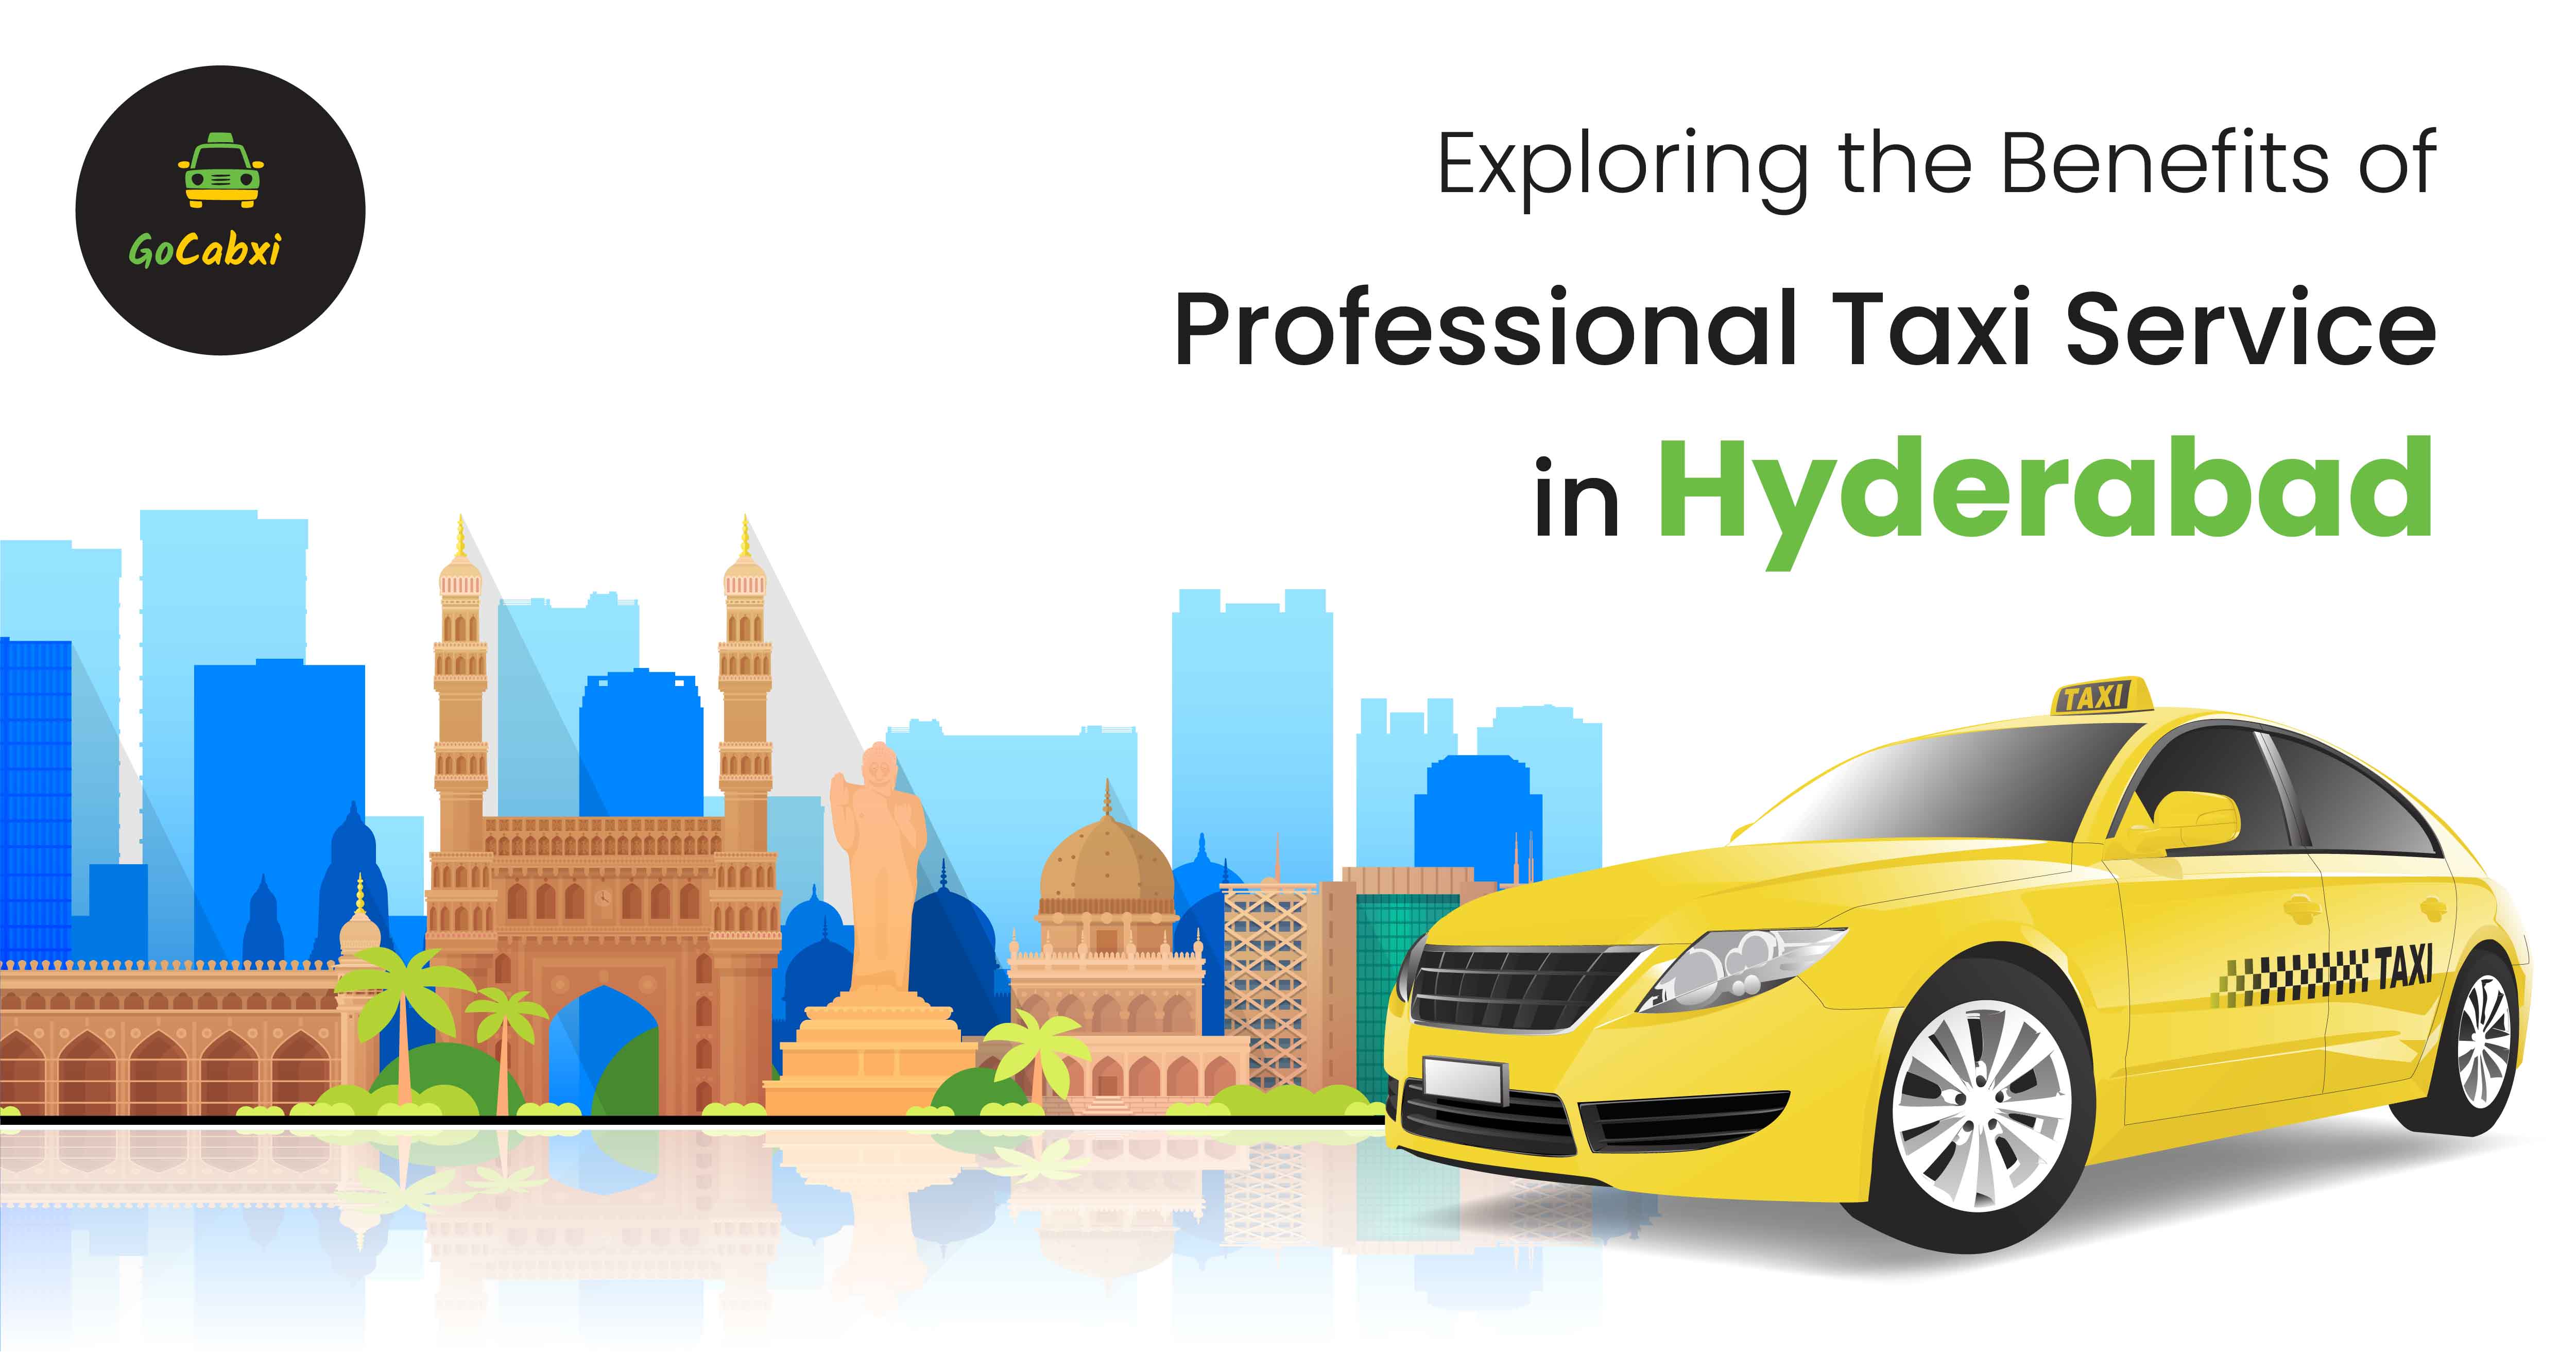 Exploring the Benefits of Professional Taxi Service in Hyderabad